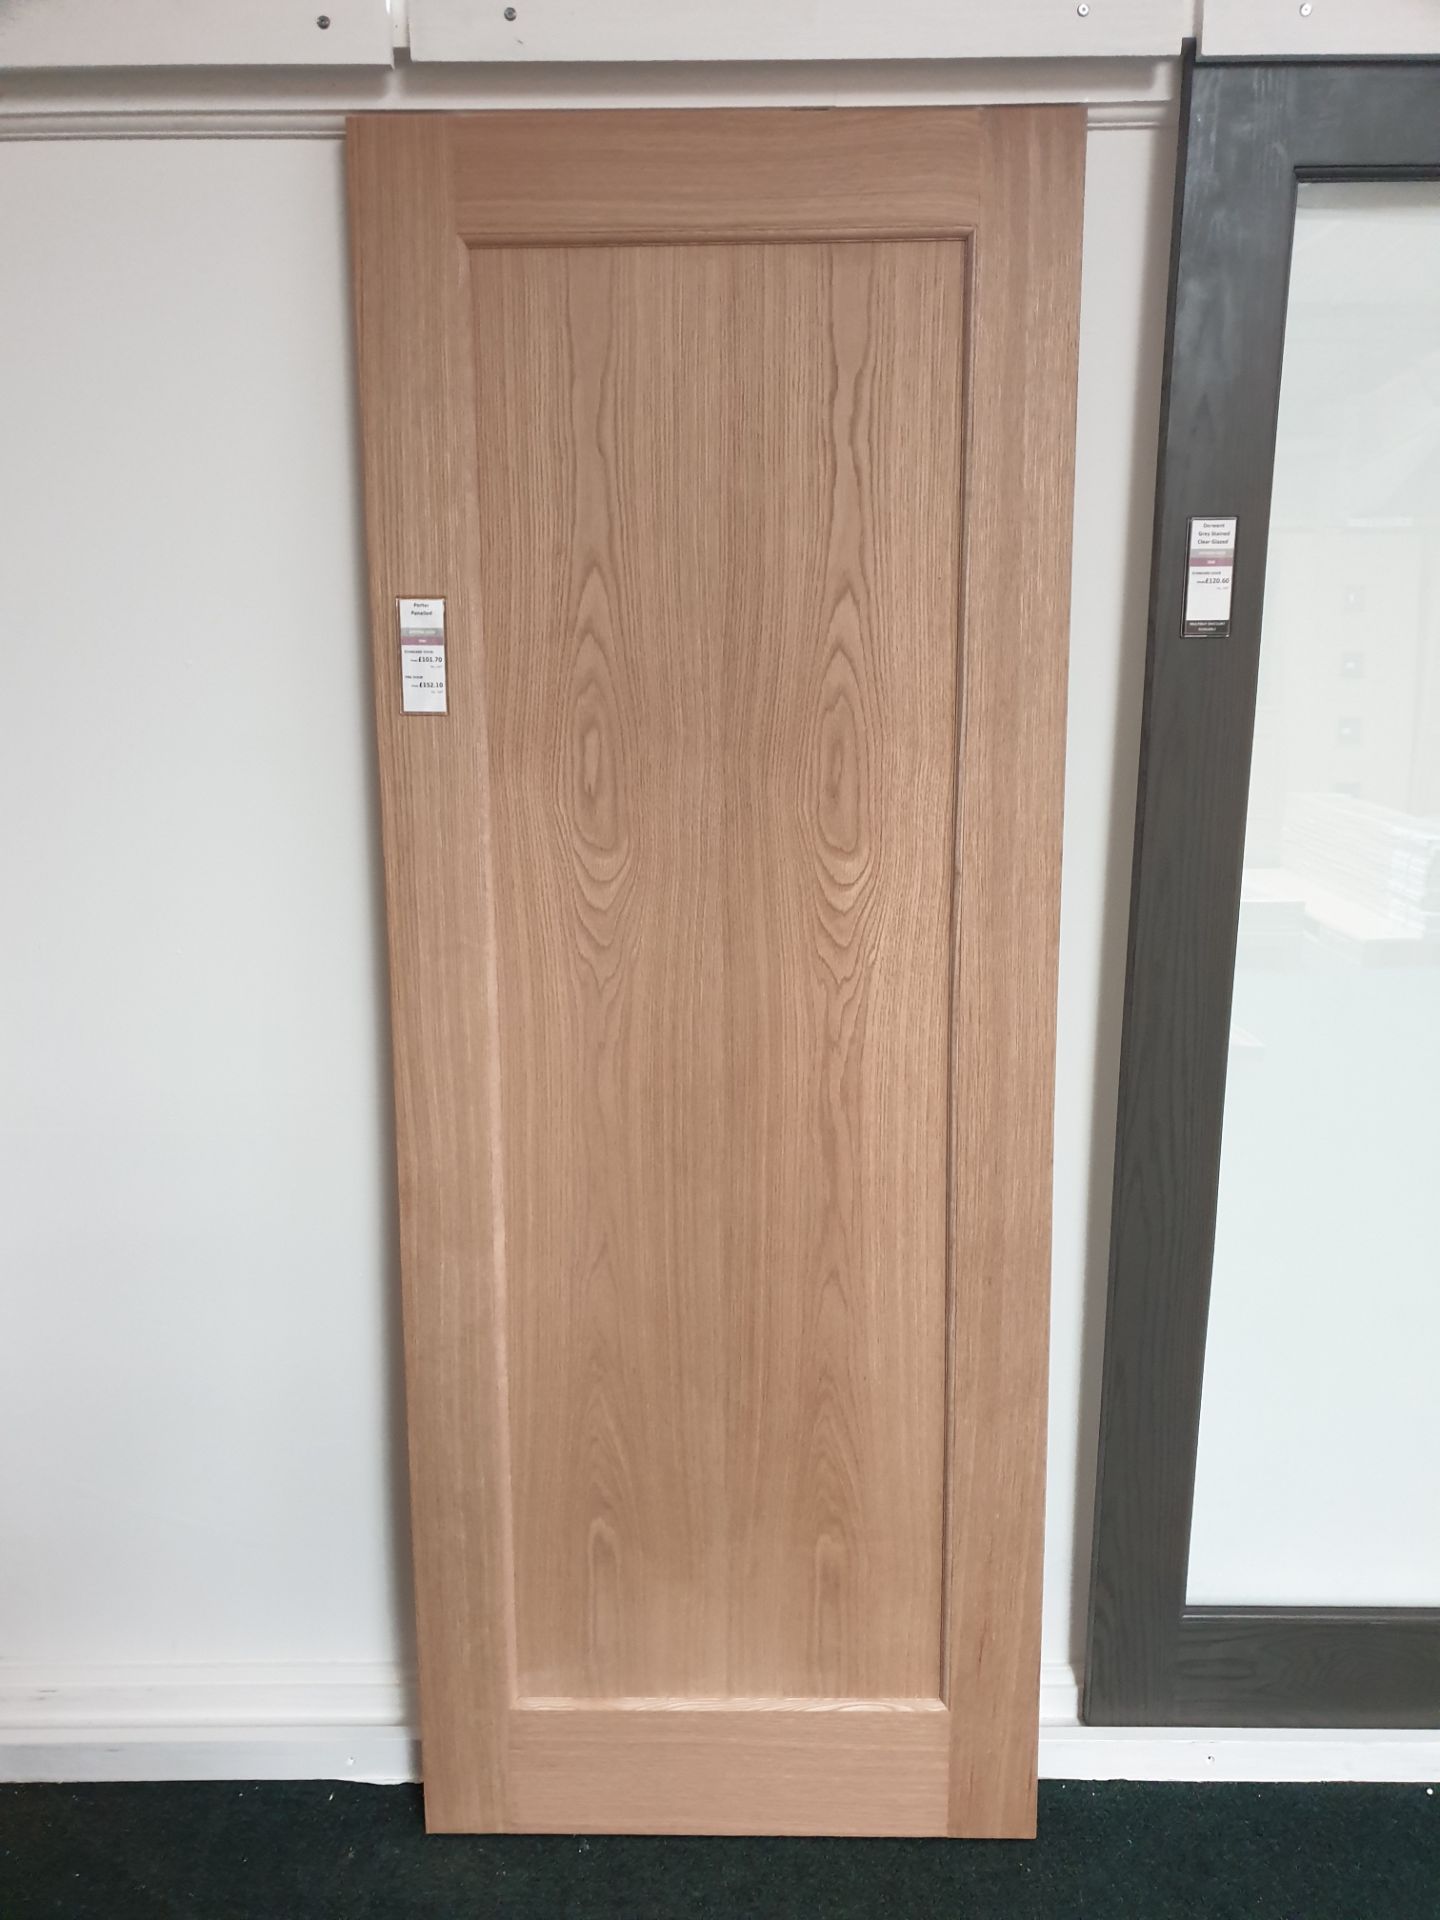 3 x Porter Flat Panel Internal Fire Door AWOPORT24FD 1981x610x44mm - Lots to be handed out in